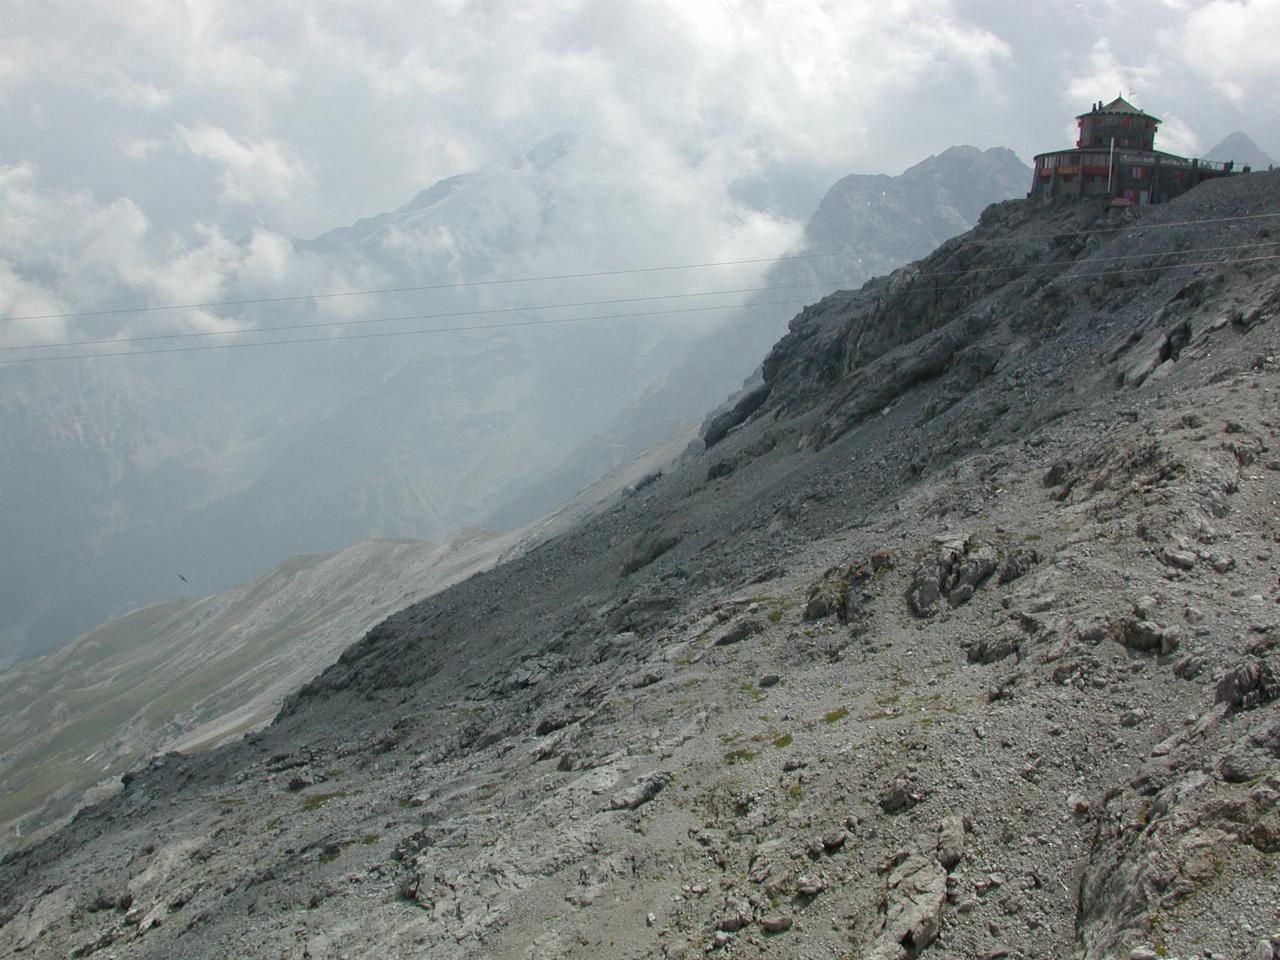 At Stelvio Pass, the buildng is called 